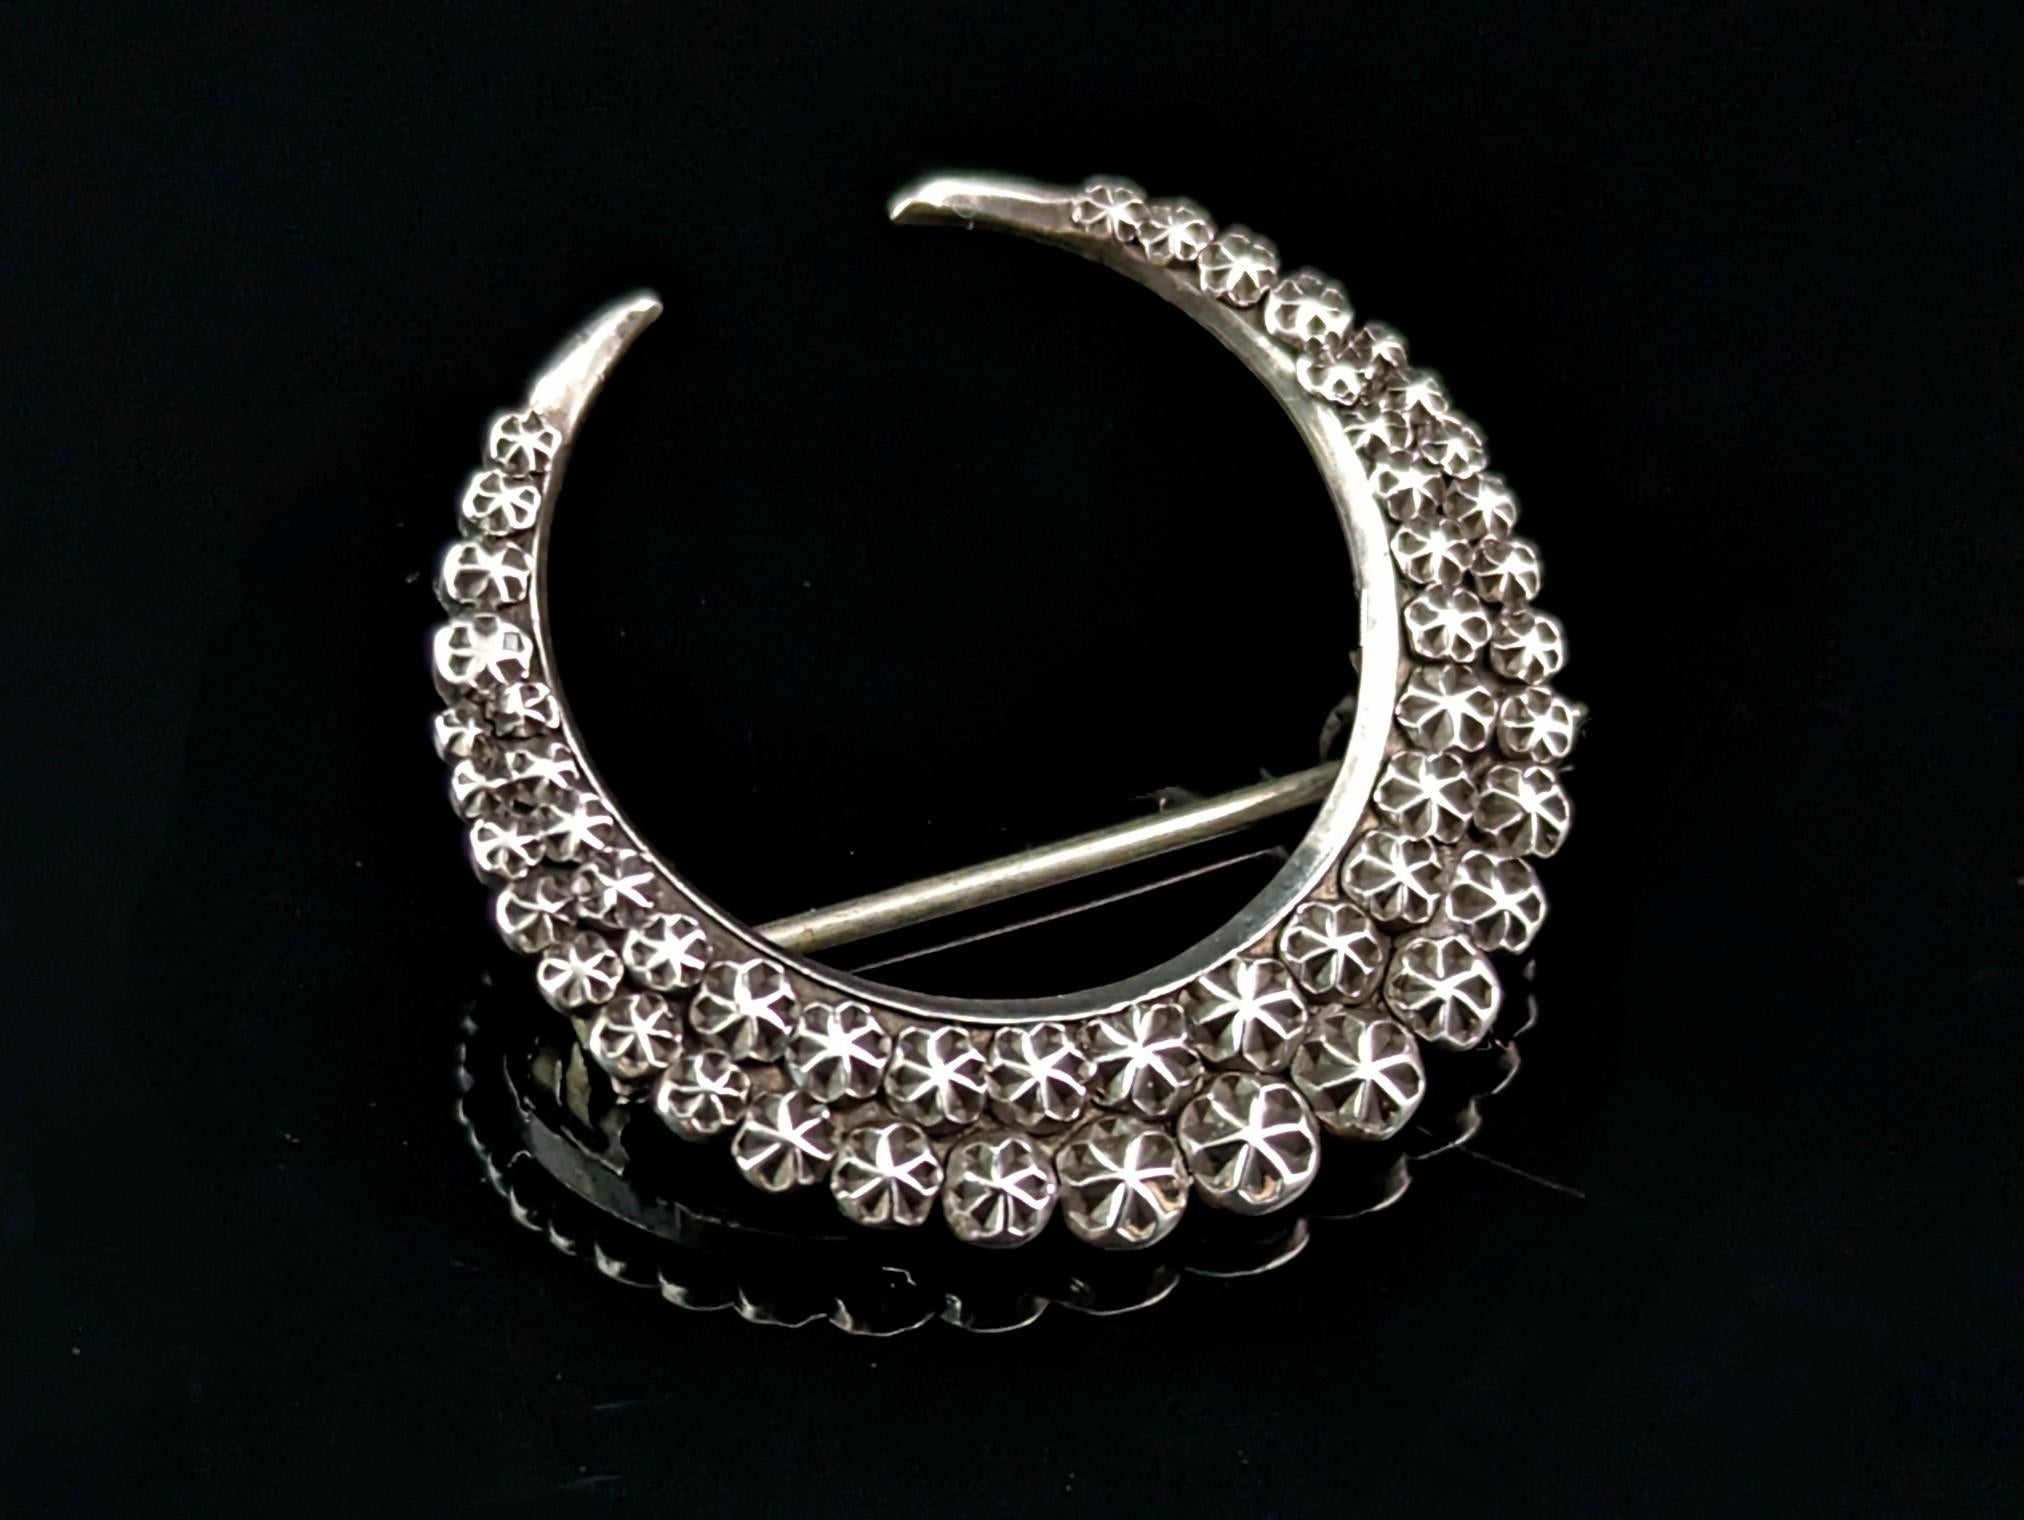 If you are a lover of celestial jewellery then this one is for you! A sterling silver crescent moon brooch by Charles Horner.

A beautiful curved moon with a pastry cutter texture with an almost star like pattern by a renowned maker of the era and